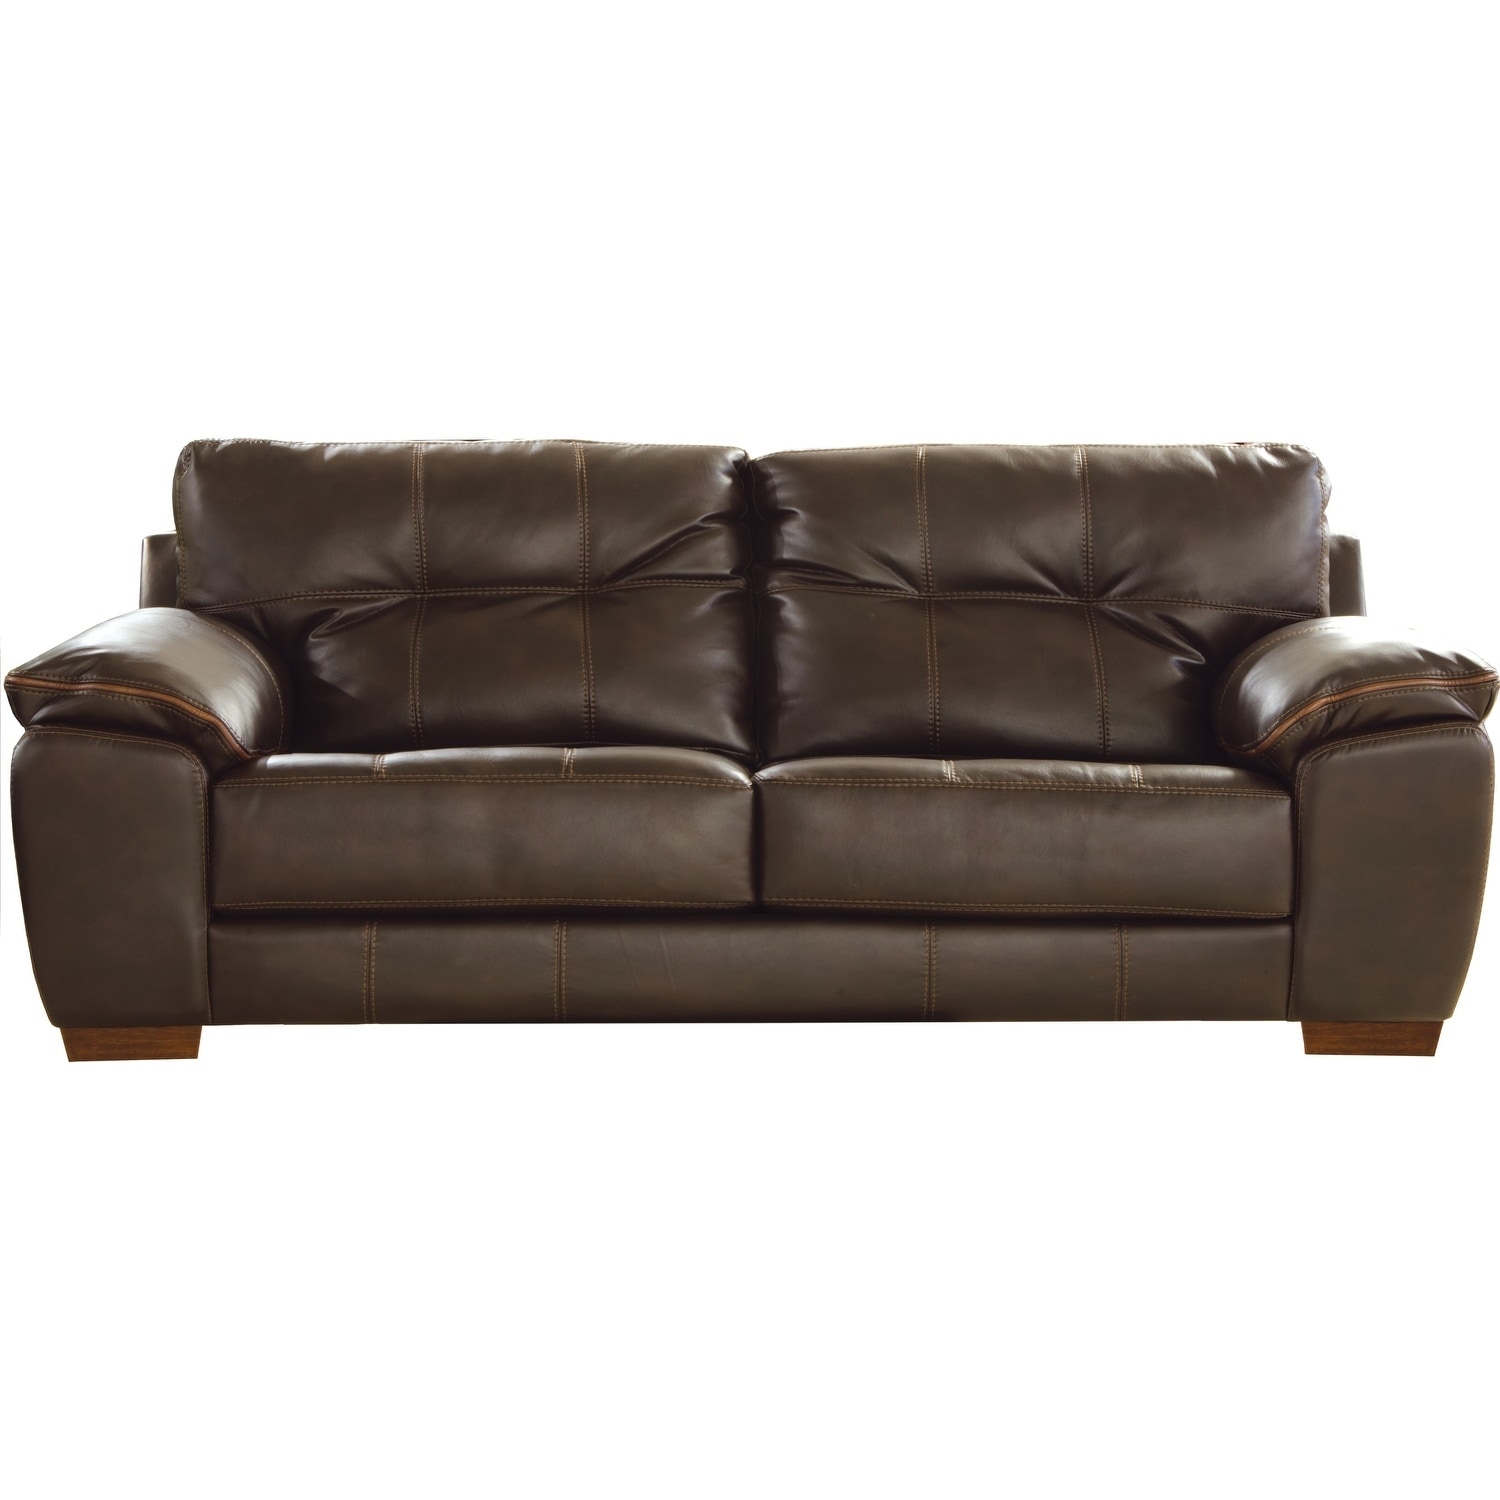 Elmer Contemporary Faux Leather Sofa - On Sale - Overstock - 29583286